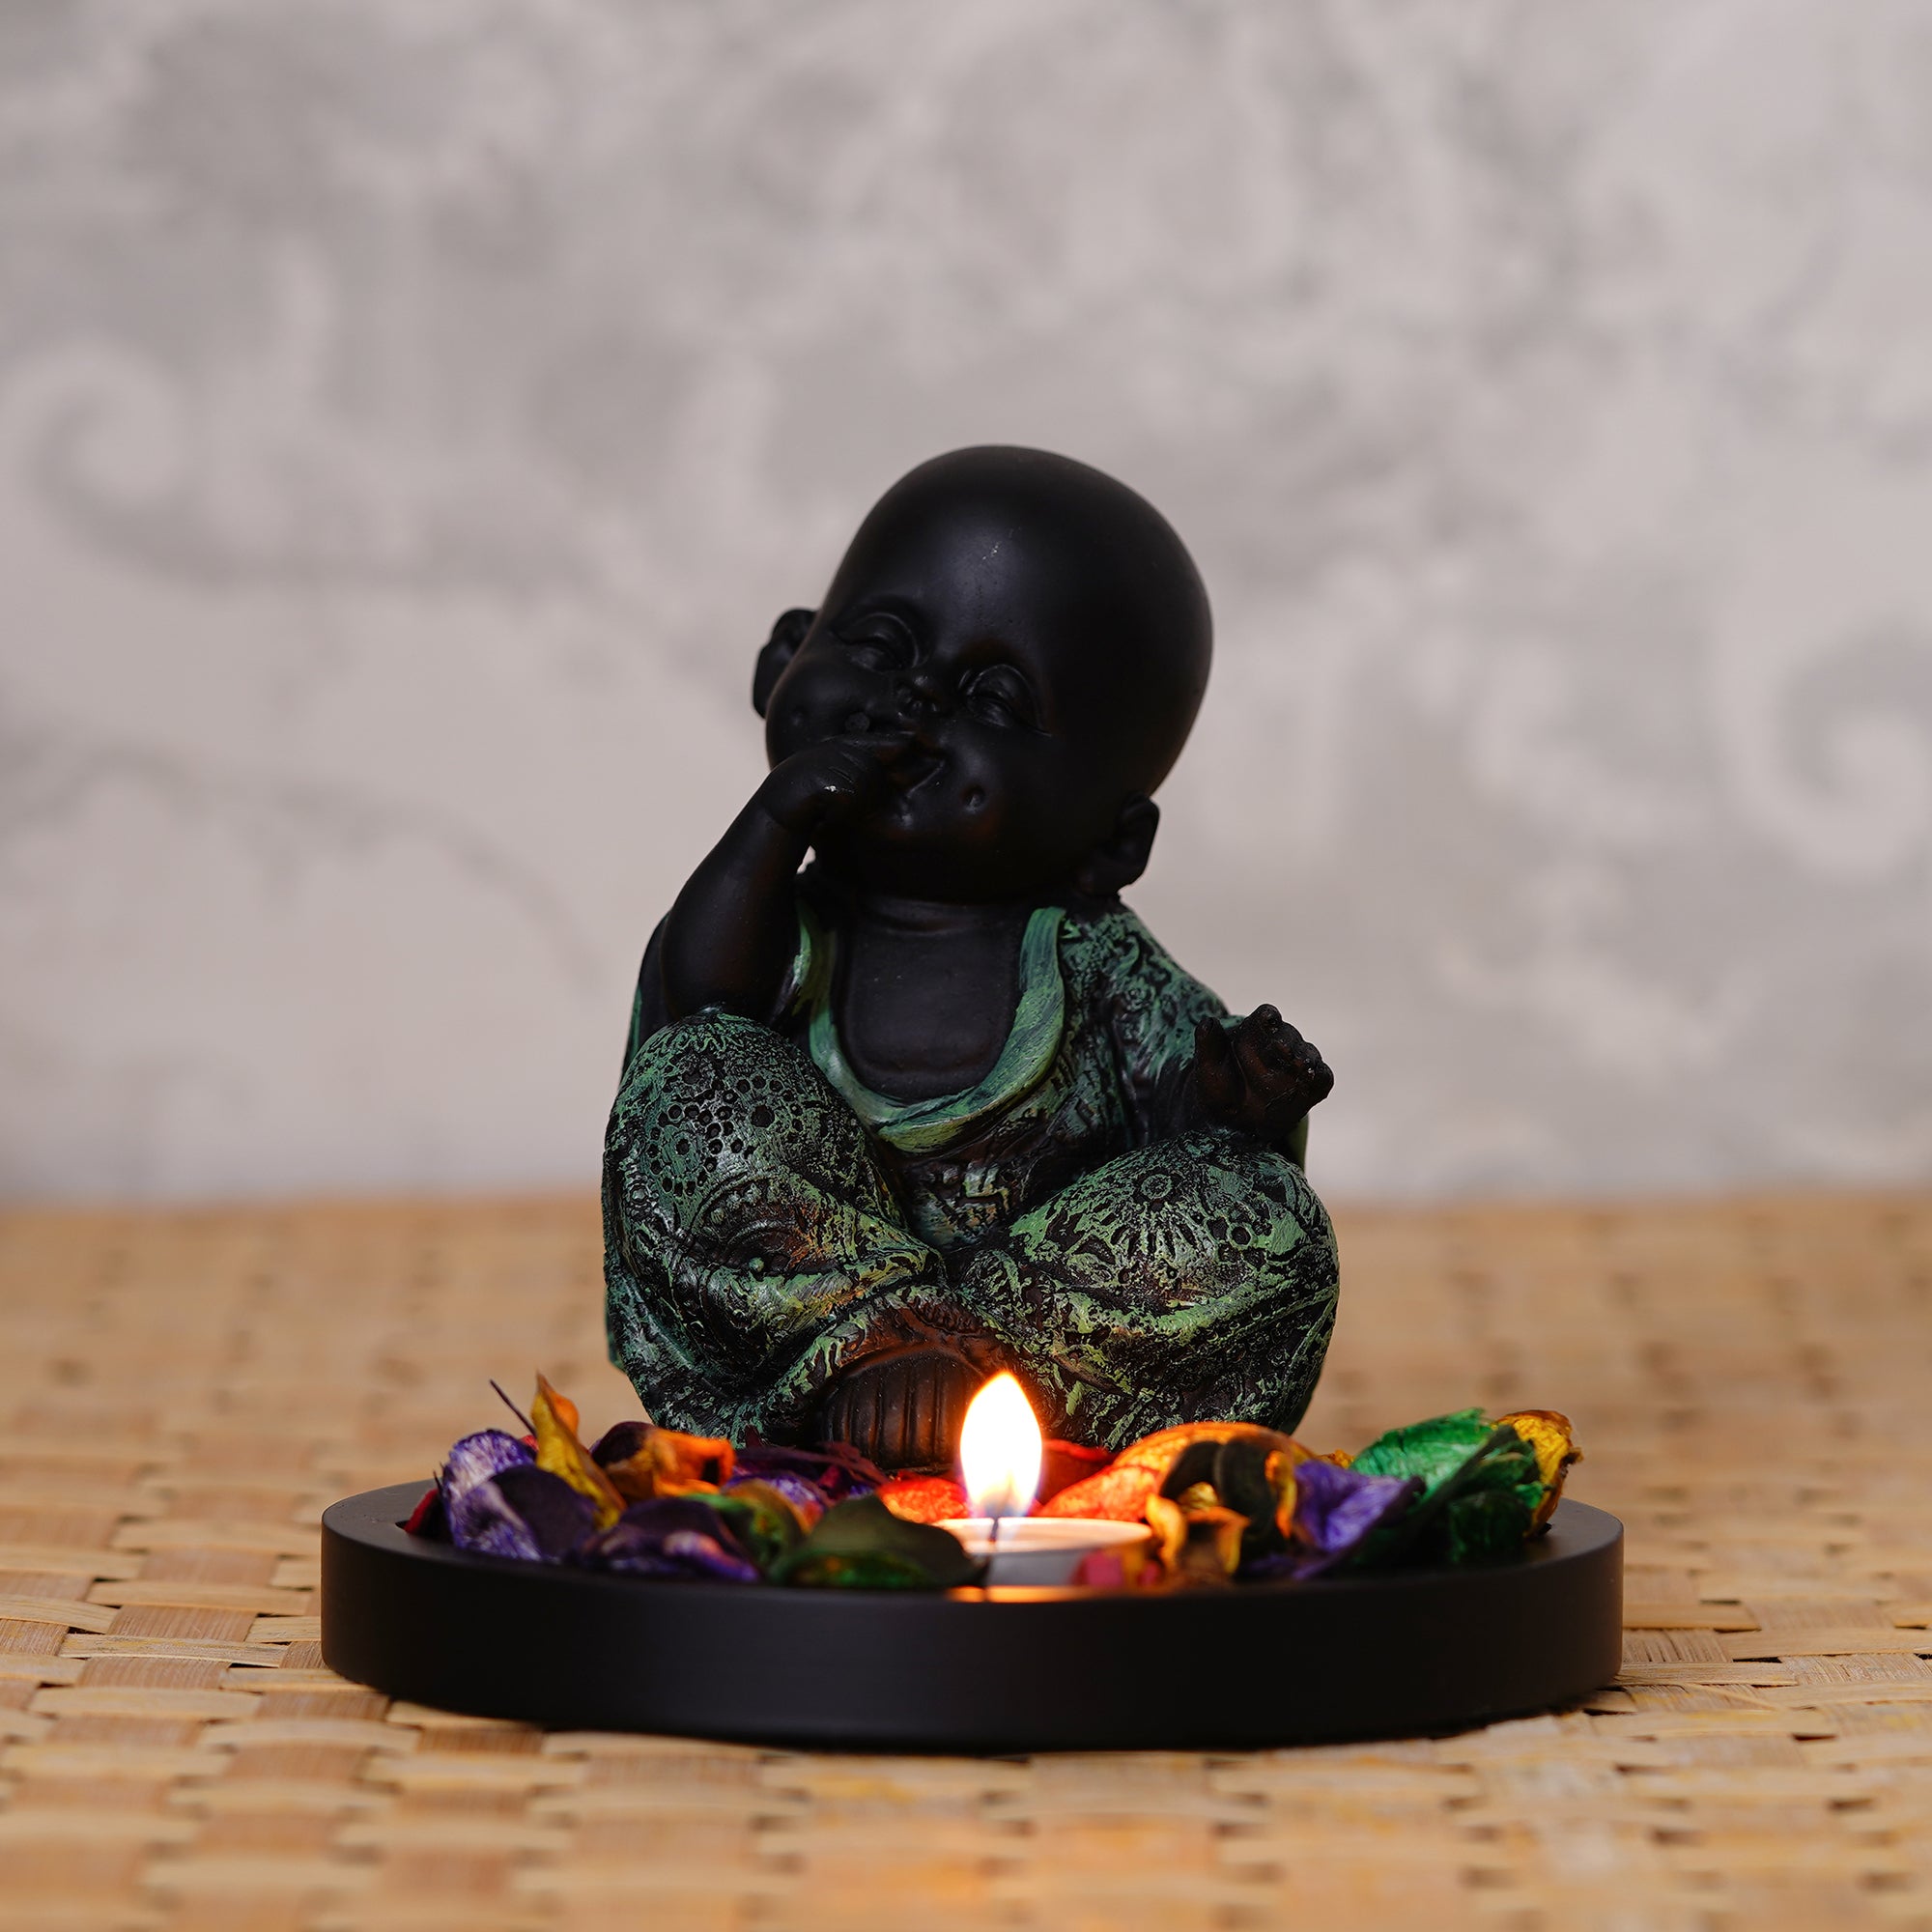 Decorative Smiling Green Monk Buddha with Wooden Base, Fragranced Petals and Tealight